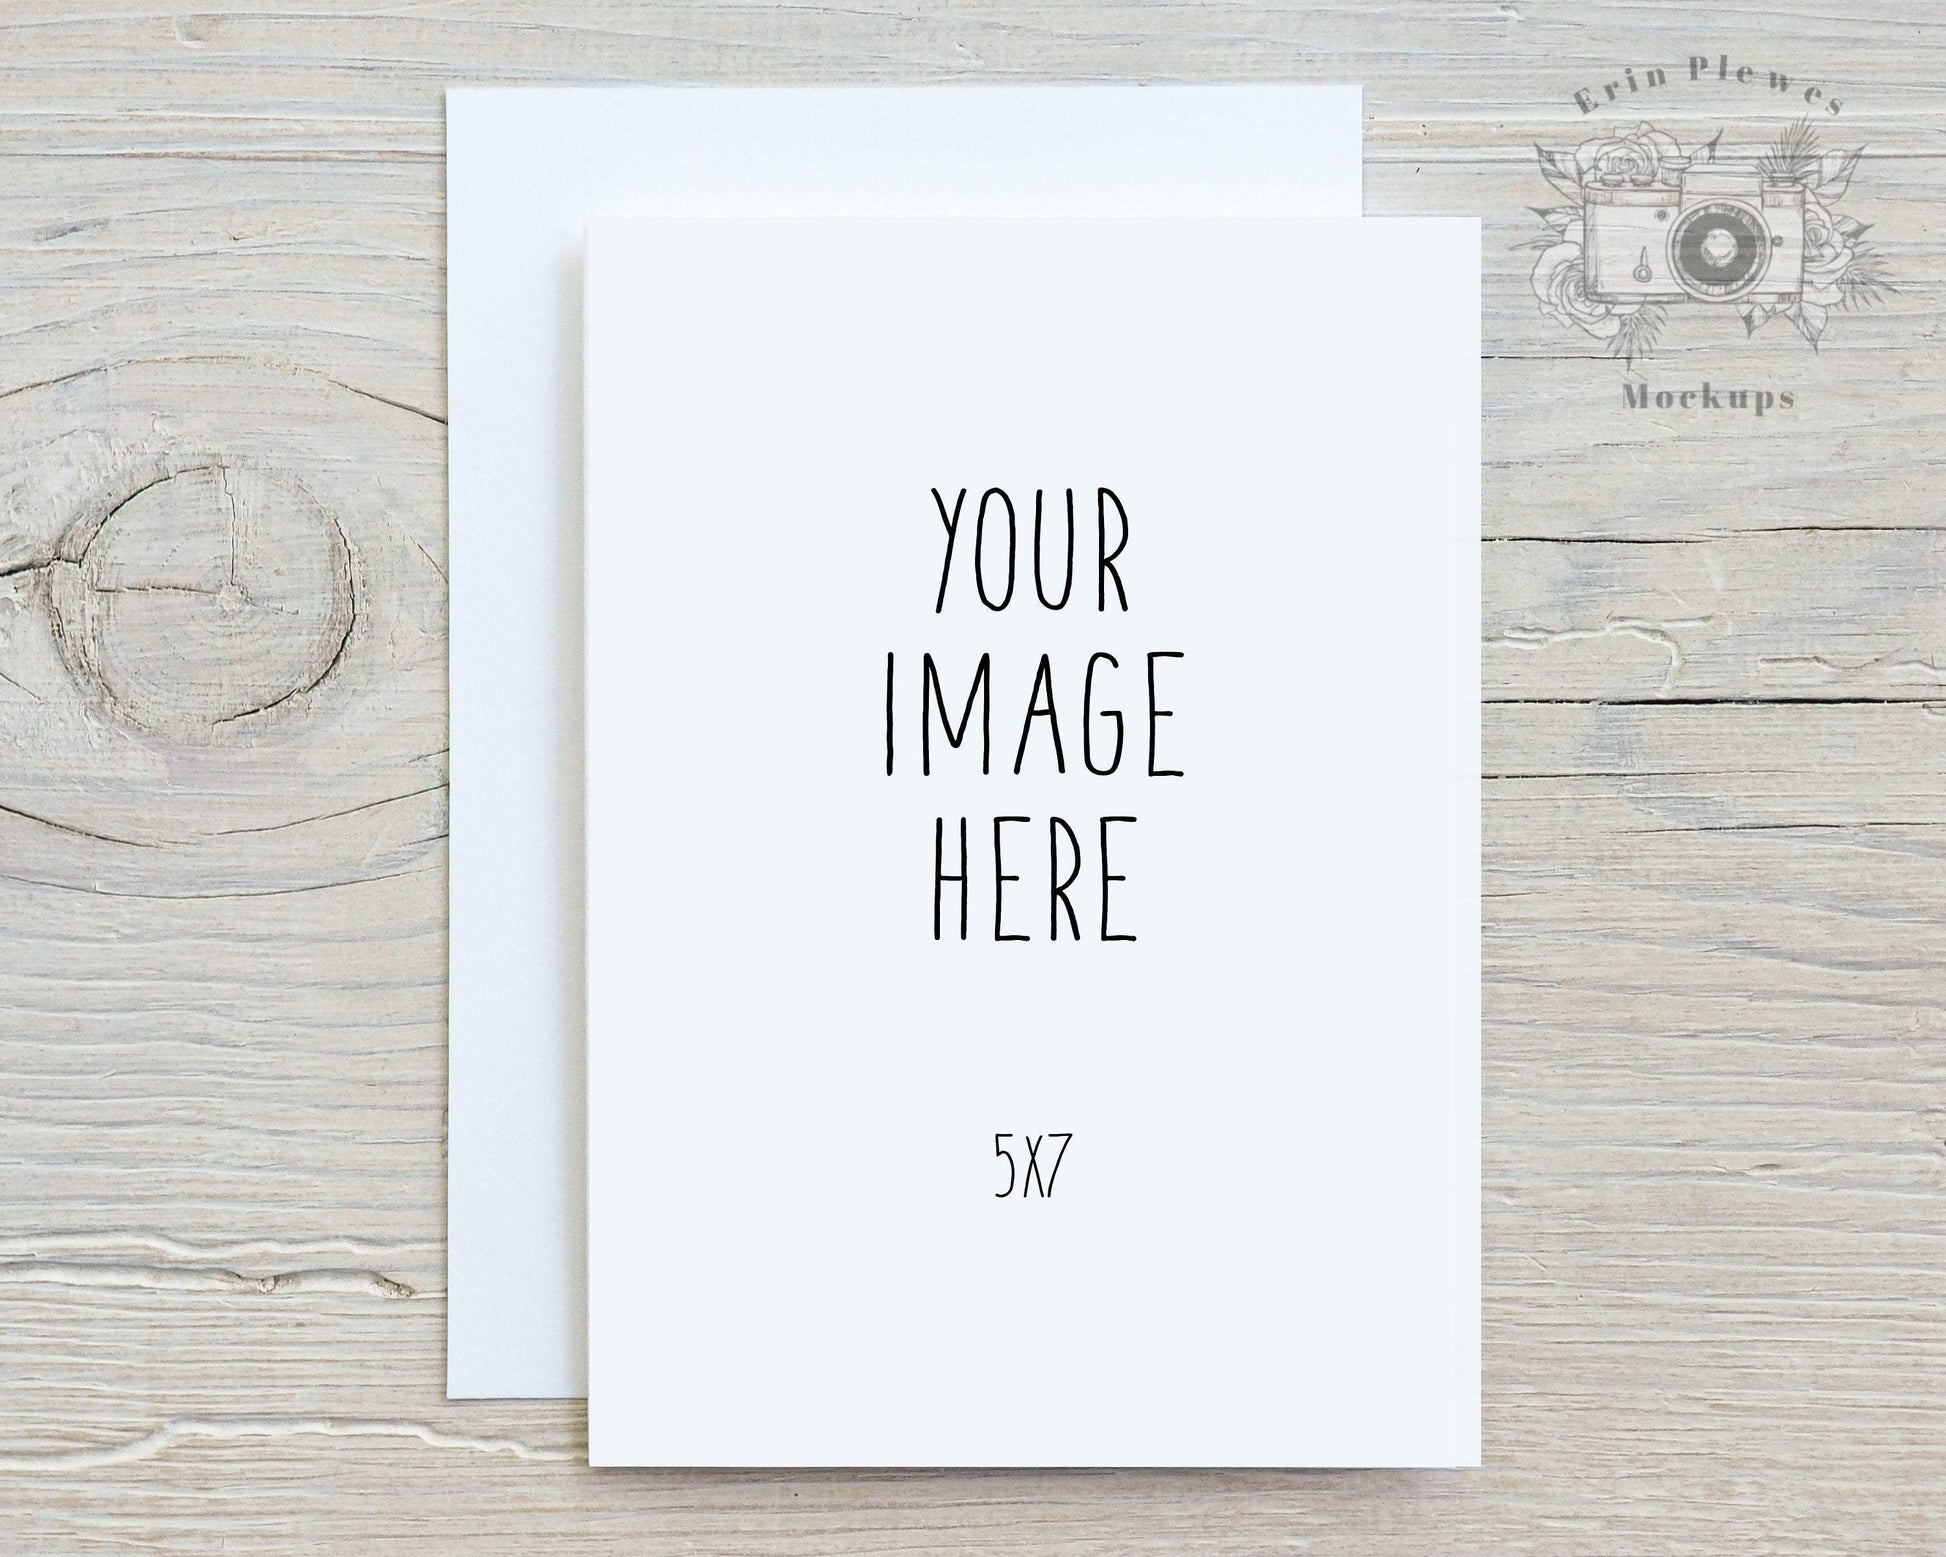 Erin Plewes Mockups 5x7 Greeting card mockup with white envelope, Thank you card mock-up for rustic wedding and lifestyle photo, Jpeg Instant Digital Download